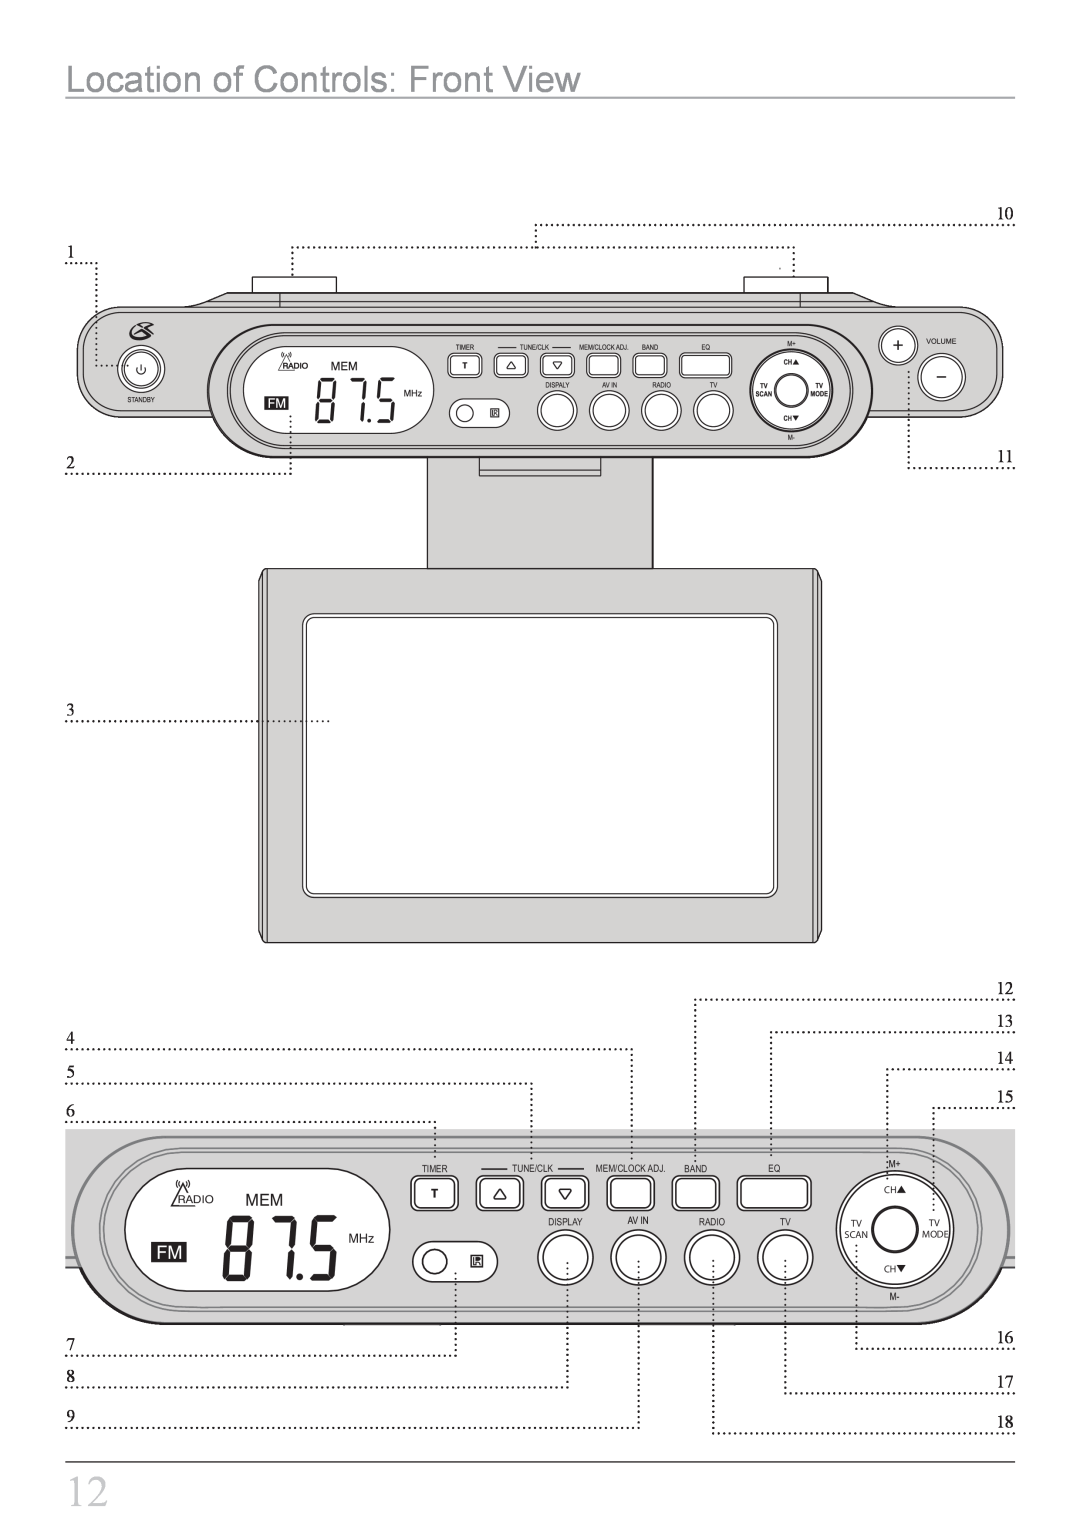 GPX KCL8807DT Location of Controls Front View, Timer, Tune/Clk, Mem/Clock Adj. Band, Display, Radio, Mode, Scan 